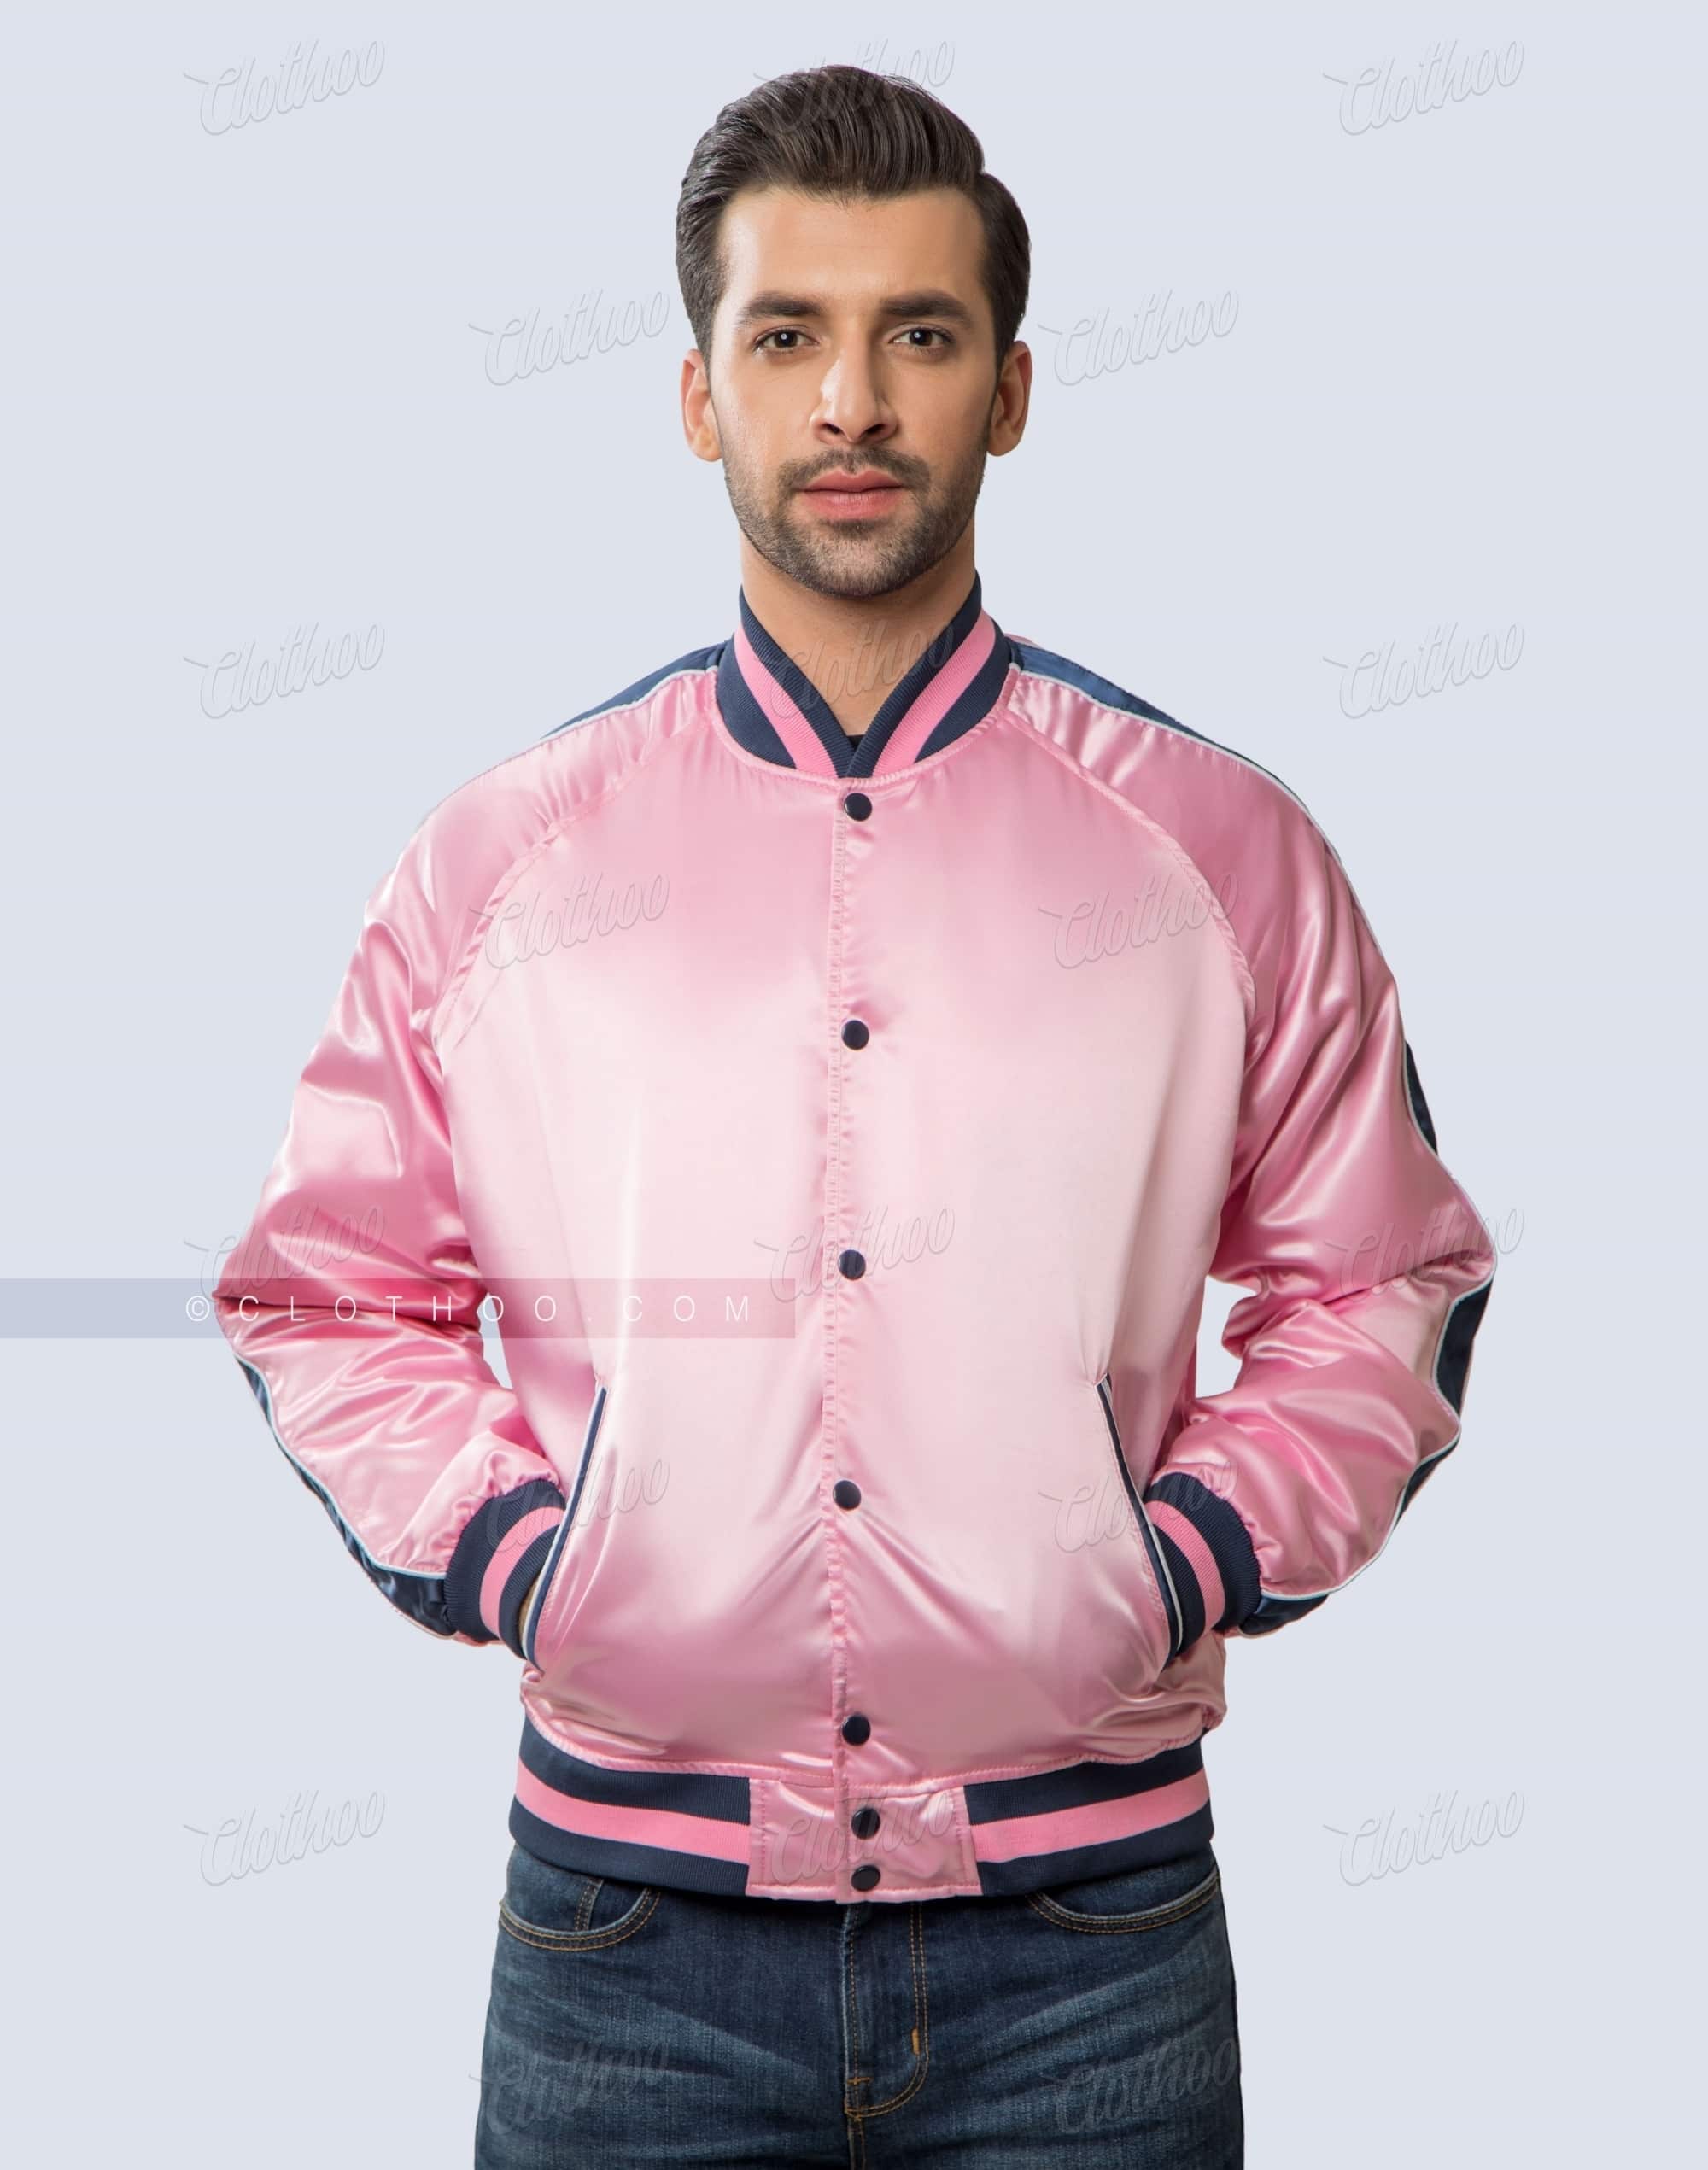 Baby Pink Satin Bomber Jacket with Striped Sleeves | Clothoo